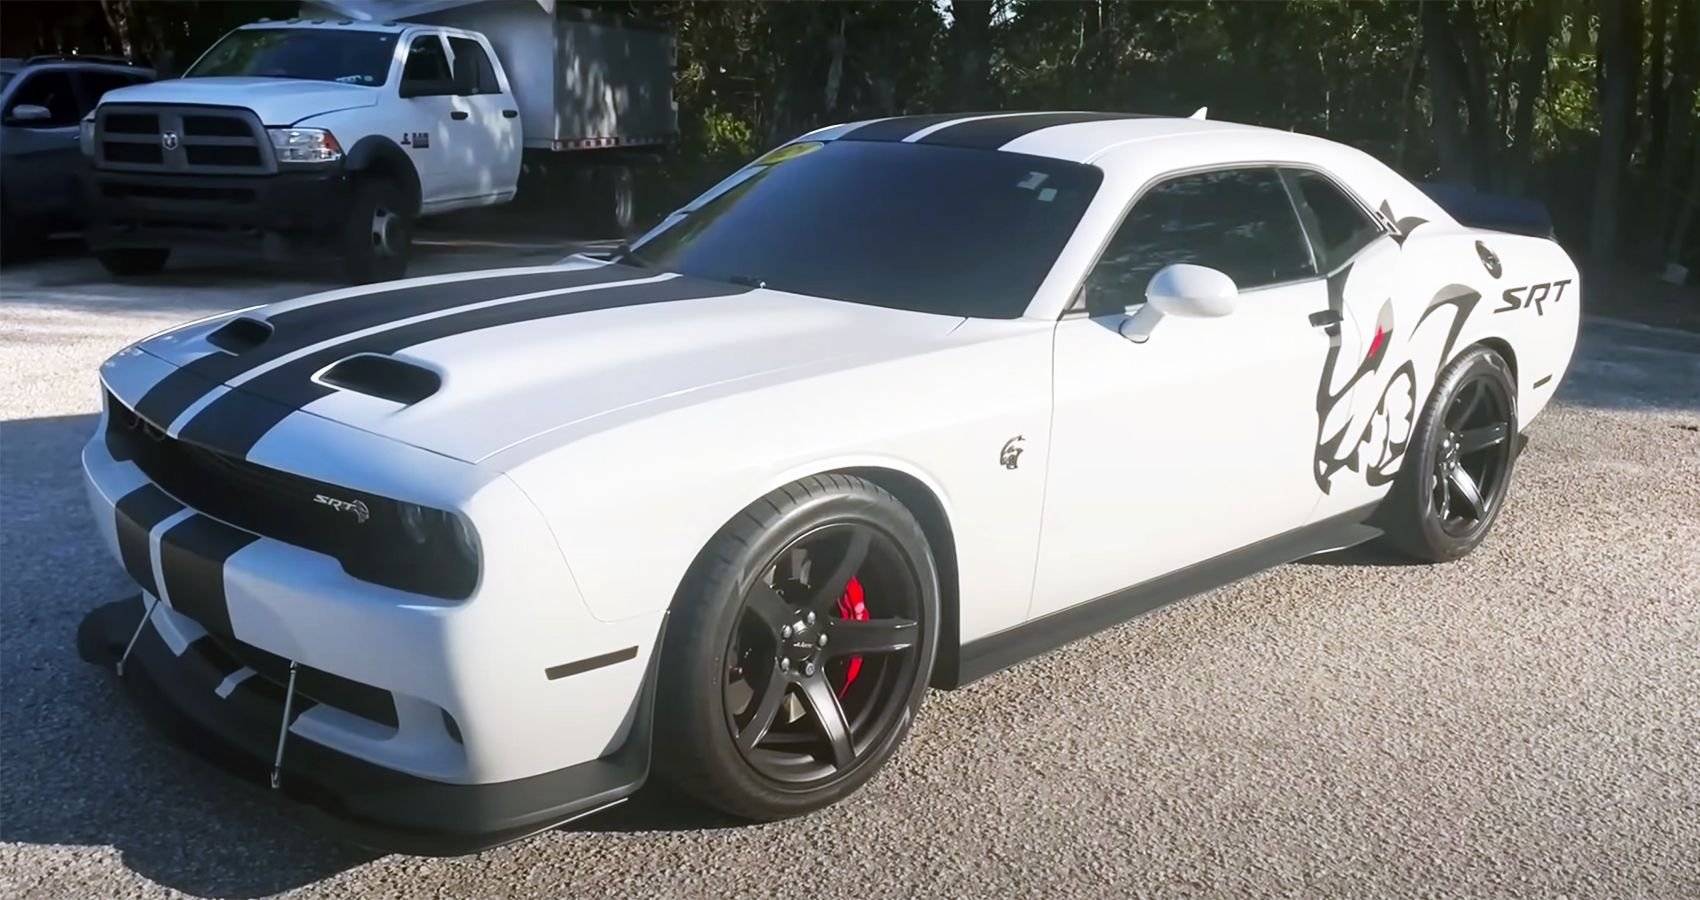 Here's How You Can Upgrade A Dodge Hellcat Without Voiding The Warranty